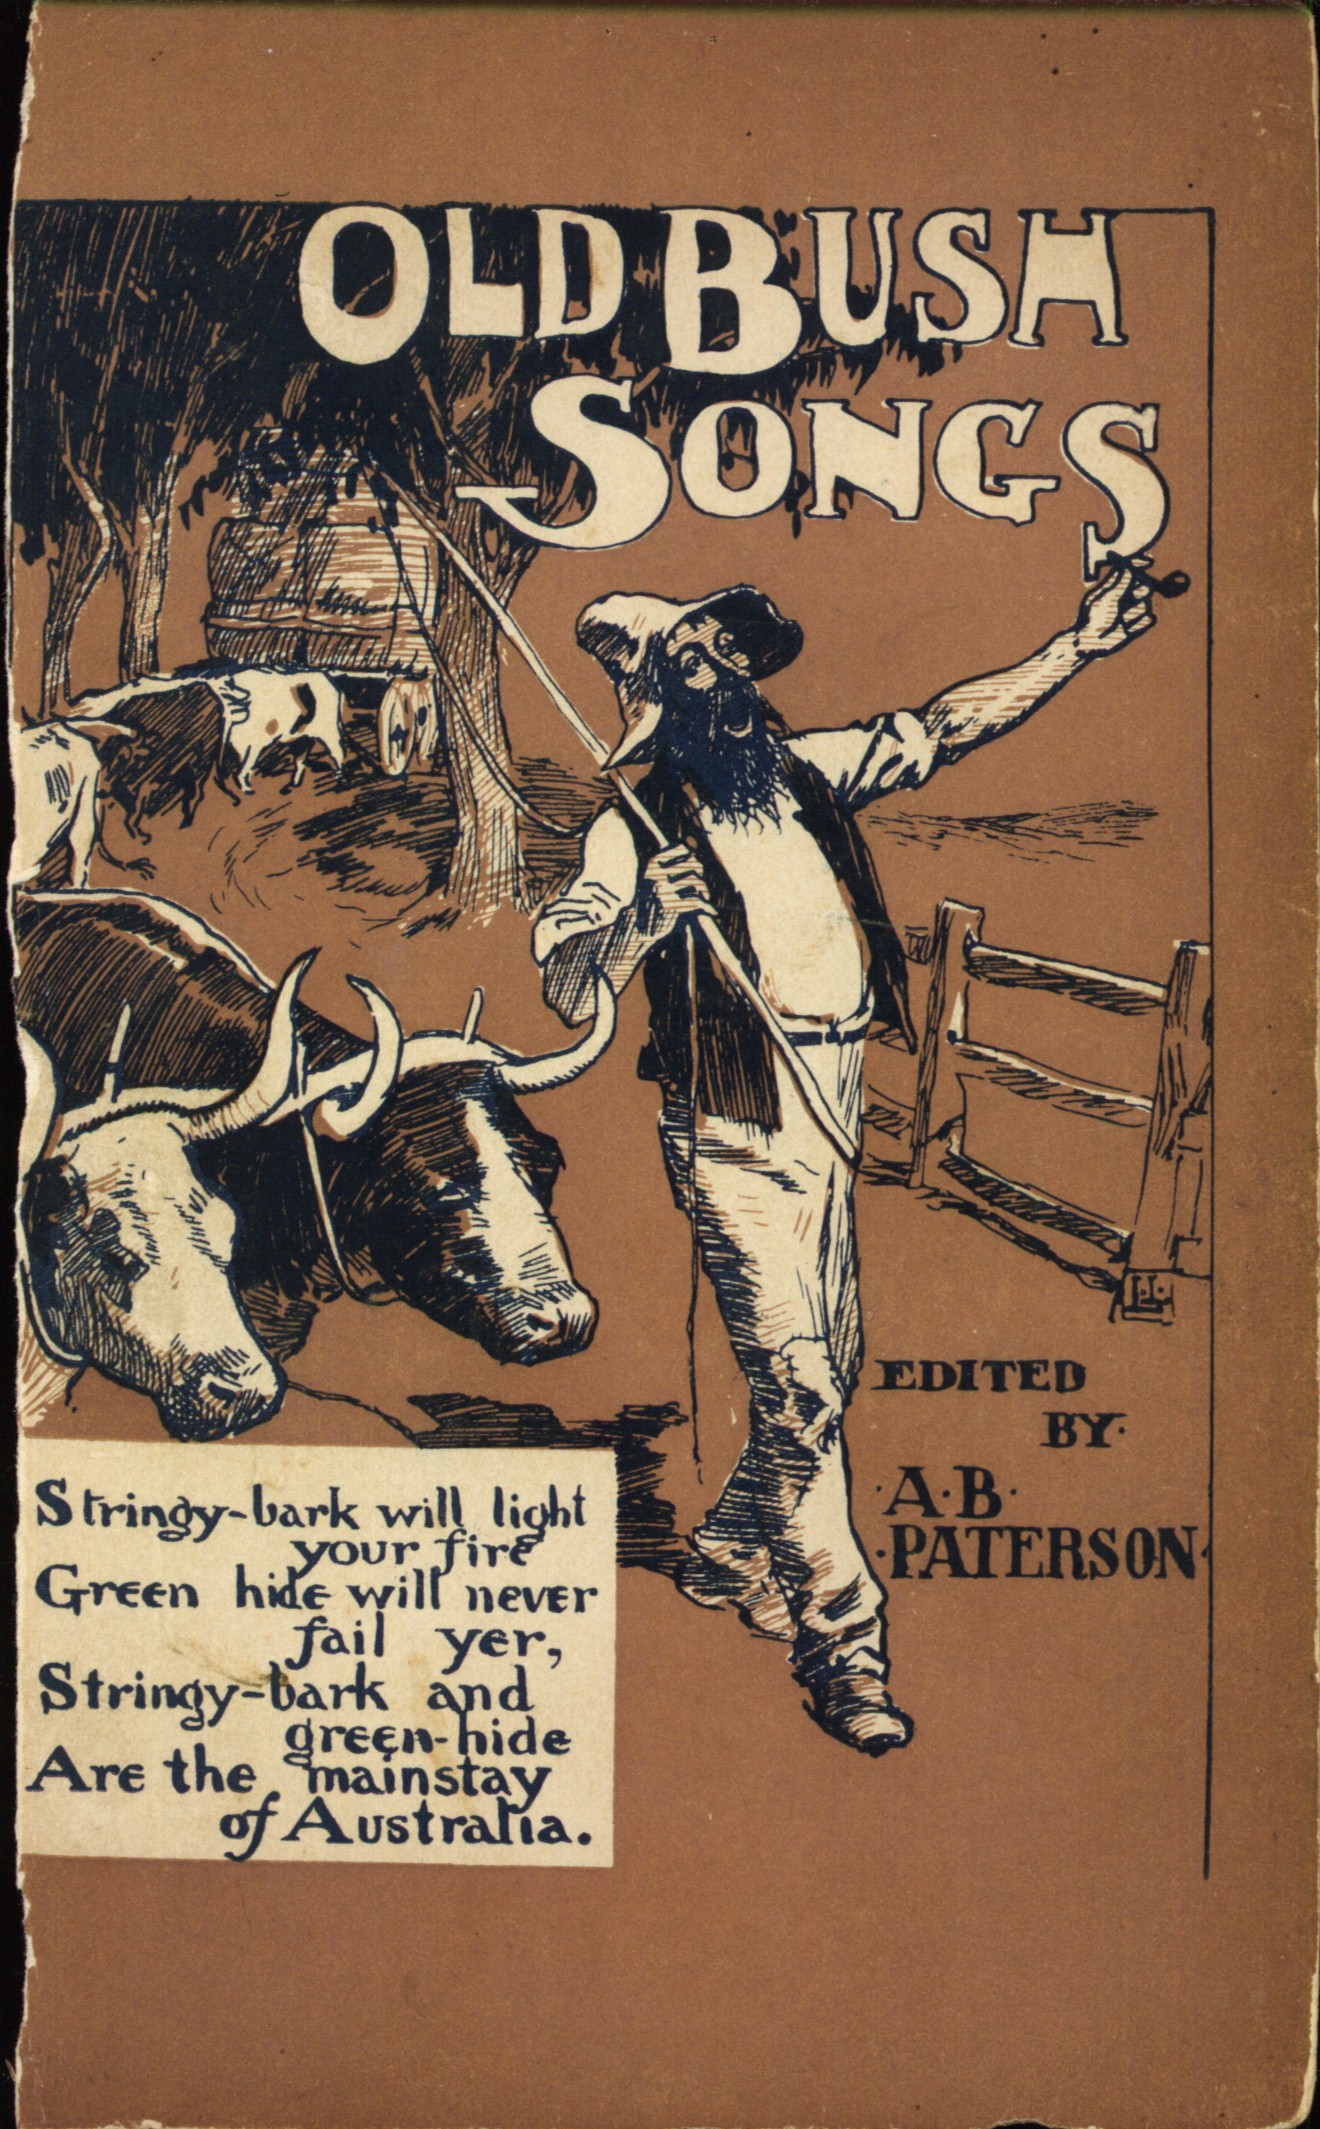 Man singing and leading cattle on a dirt road pulling a wagon.